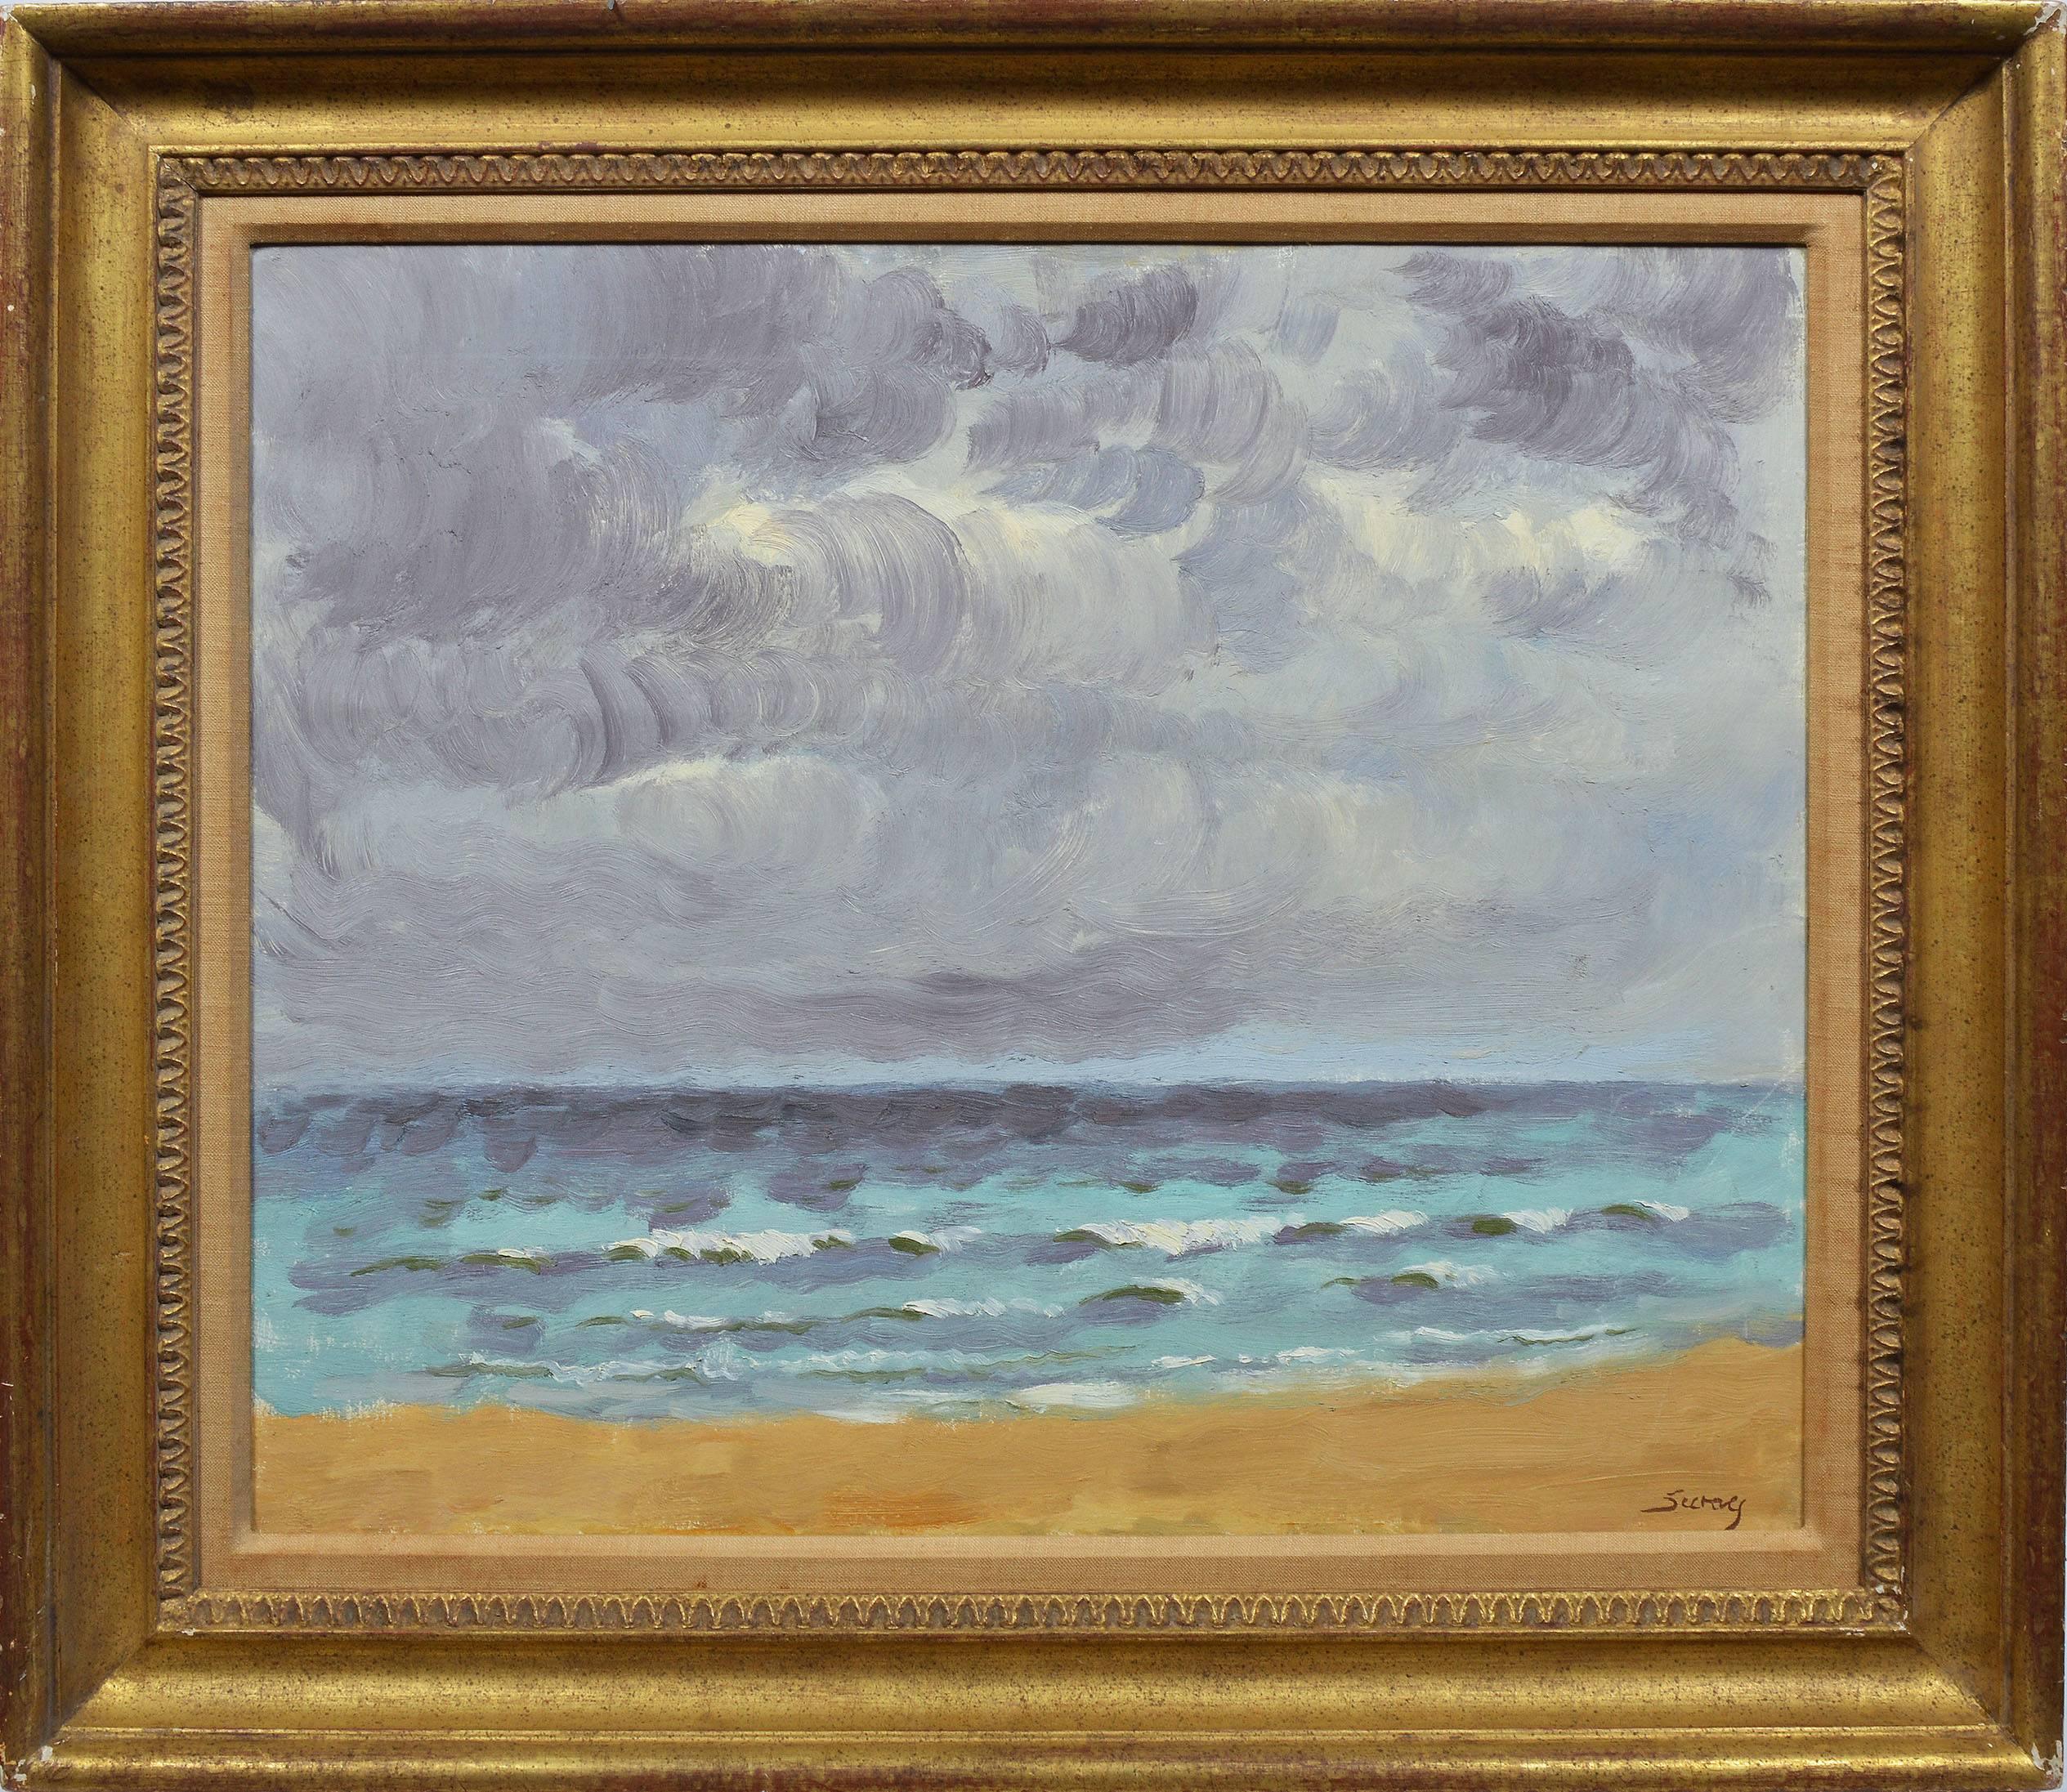 Original oil painting of a beach by Albert Sway (b.1913). Oil on canvas, circa 1940. Signed lower right, "Sway." Image size, 24"L x 20"H.